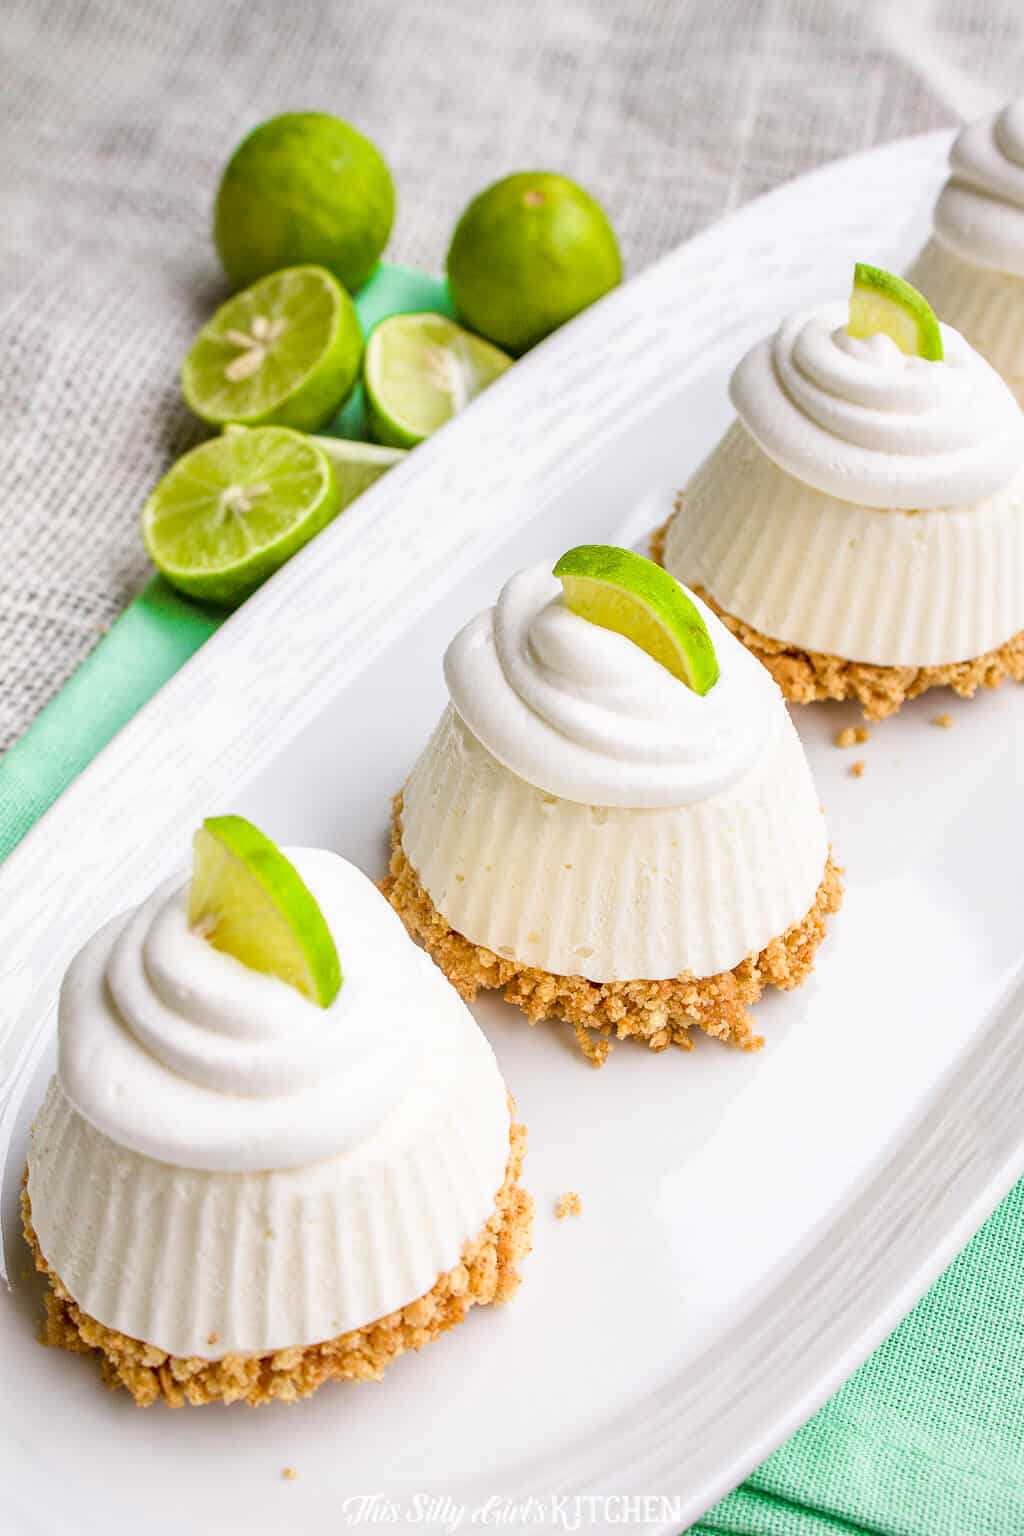 Overhead of no bake Key Lime Pie on white plate topped with whipped topping and limes